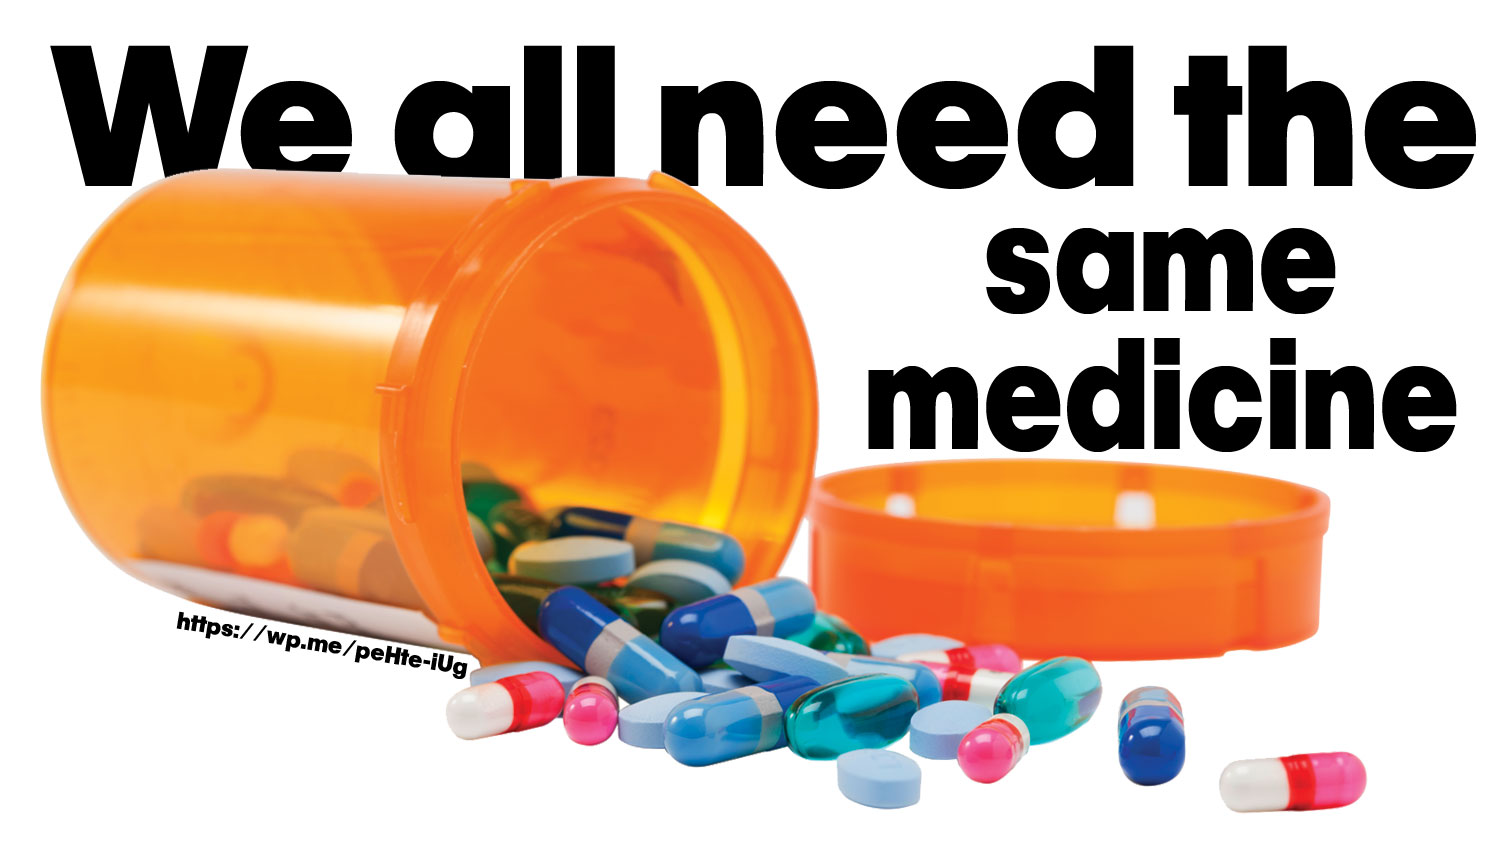 We all need the same medicine to cure sin. It is the same medicine for EVERYONE! We just need to apply it! #BGBG2